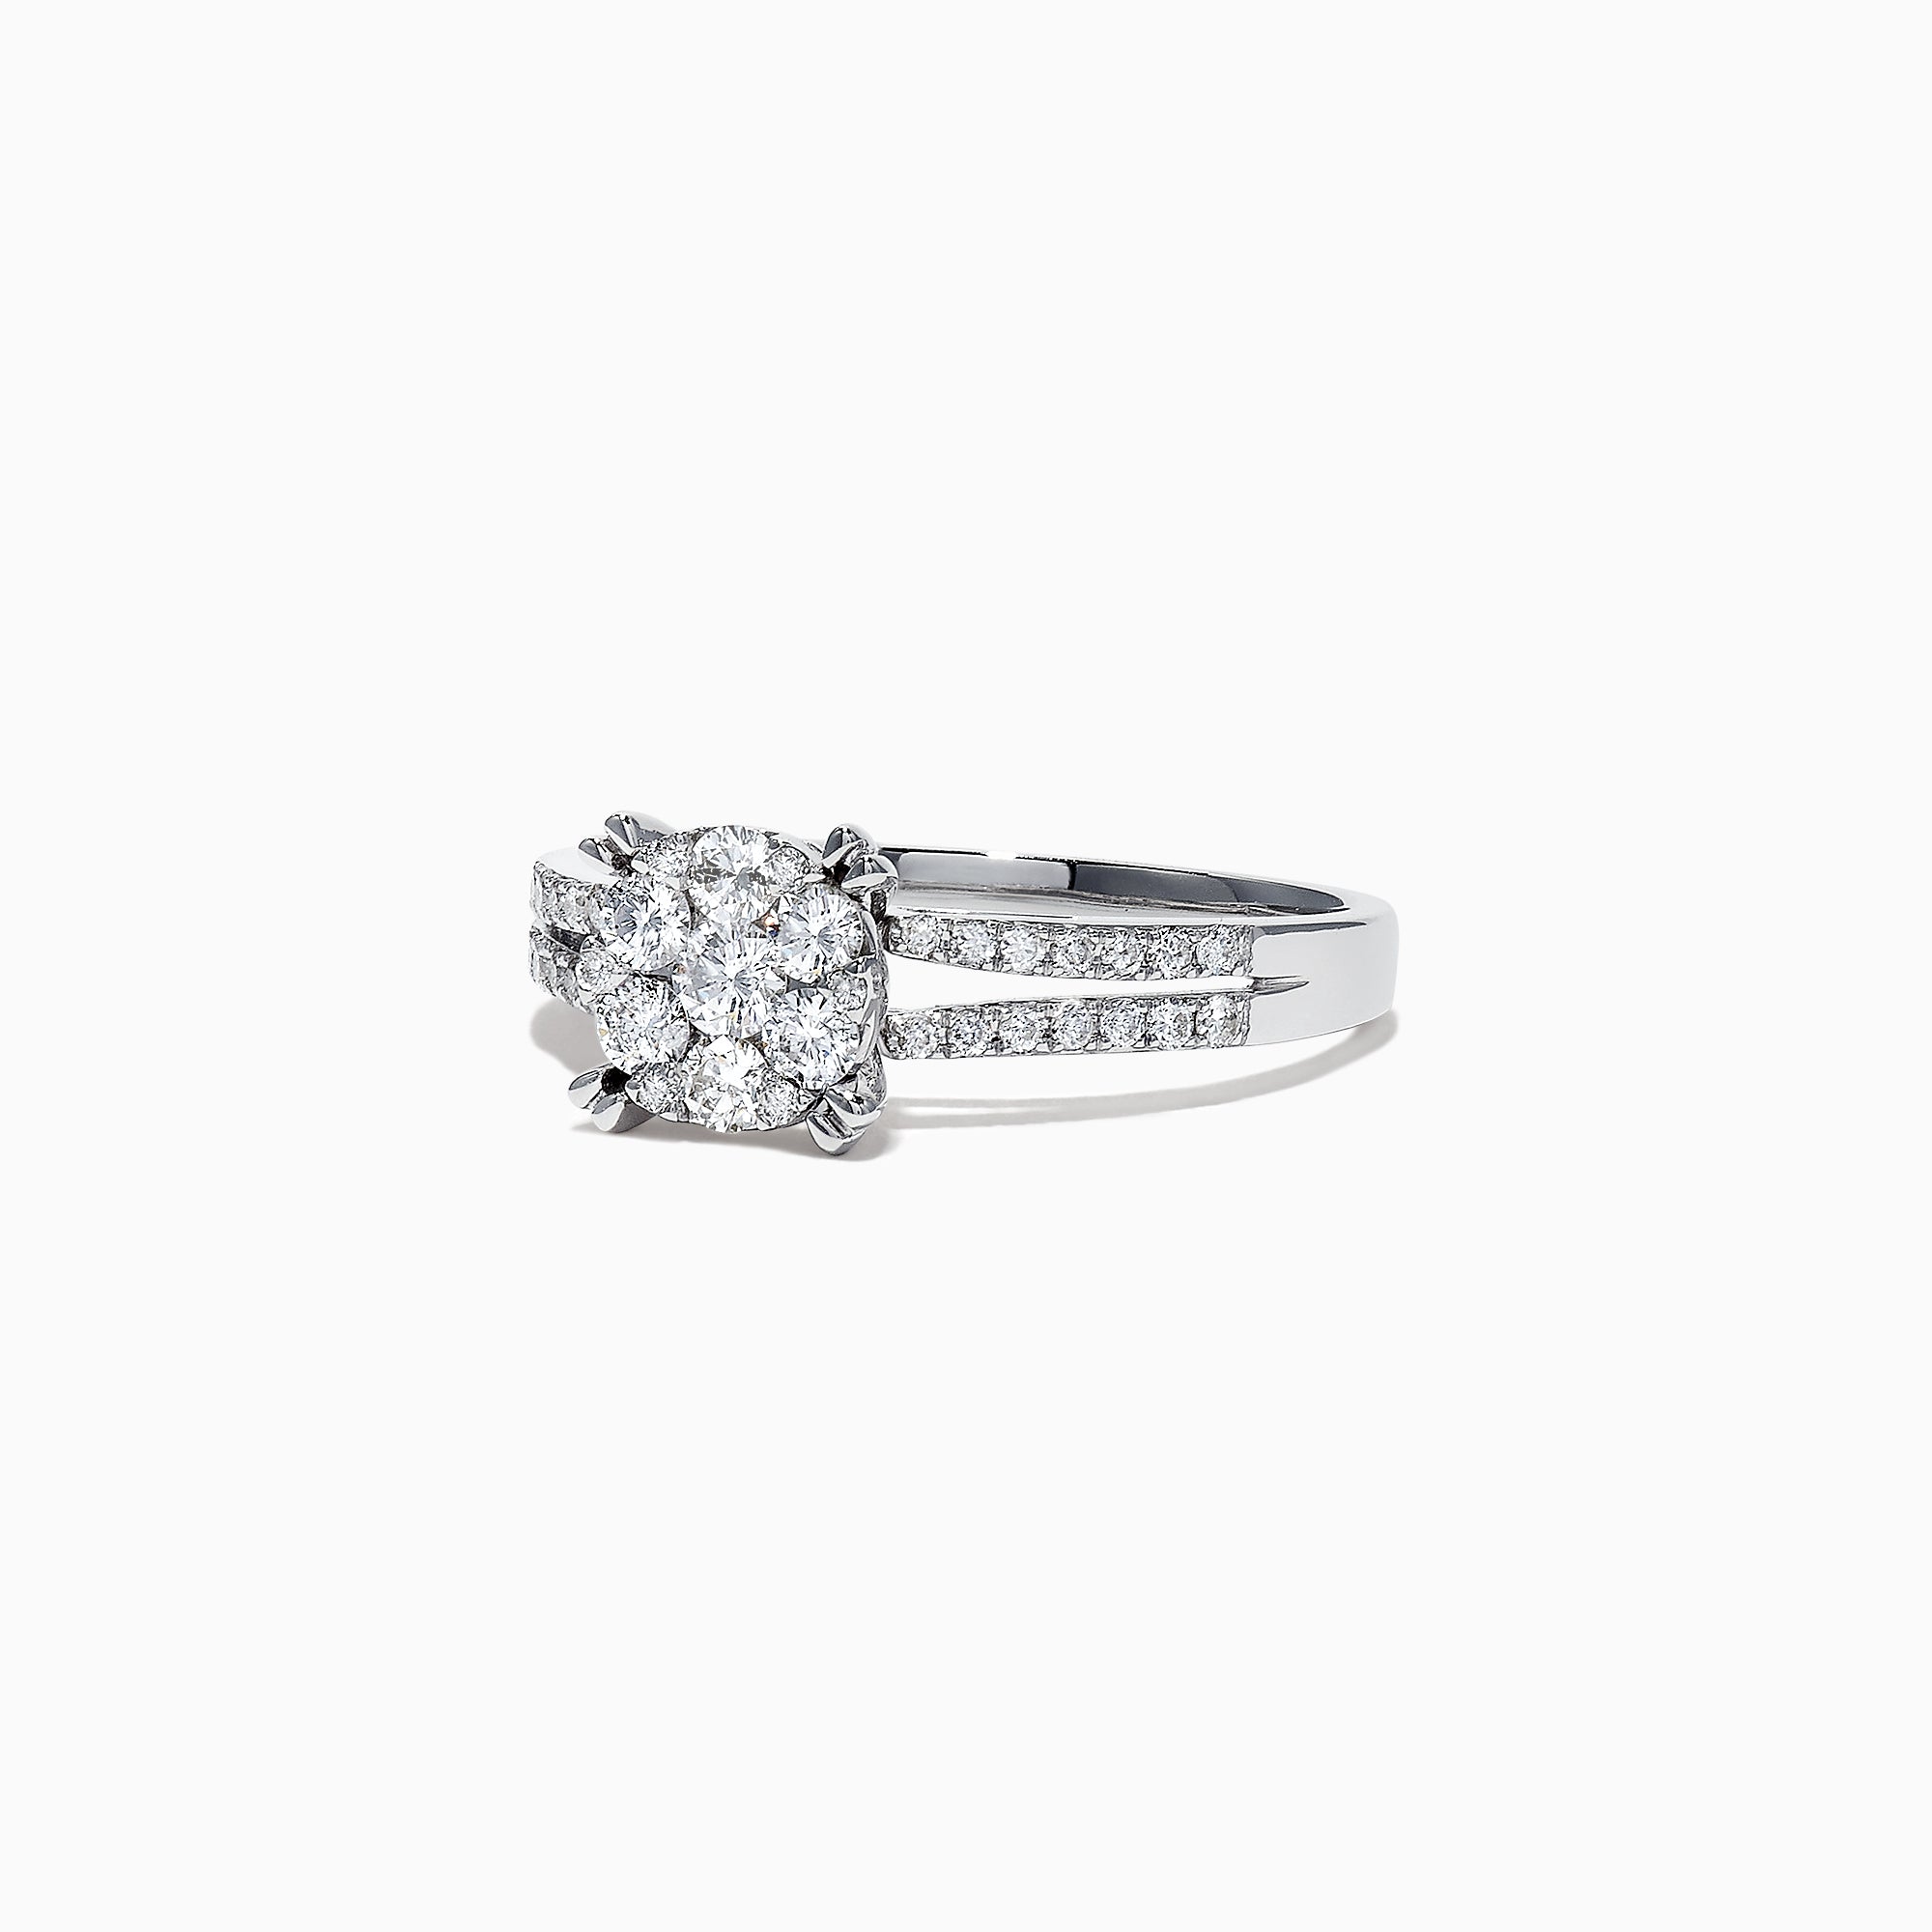 Effy Bouquet 14K White Gold Diamond Cluster Engagement Ring, 0.56 TCW